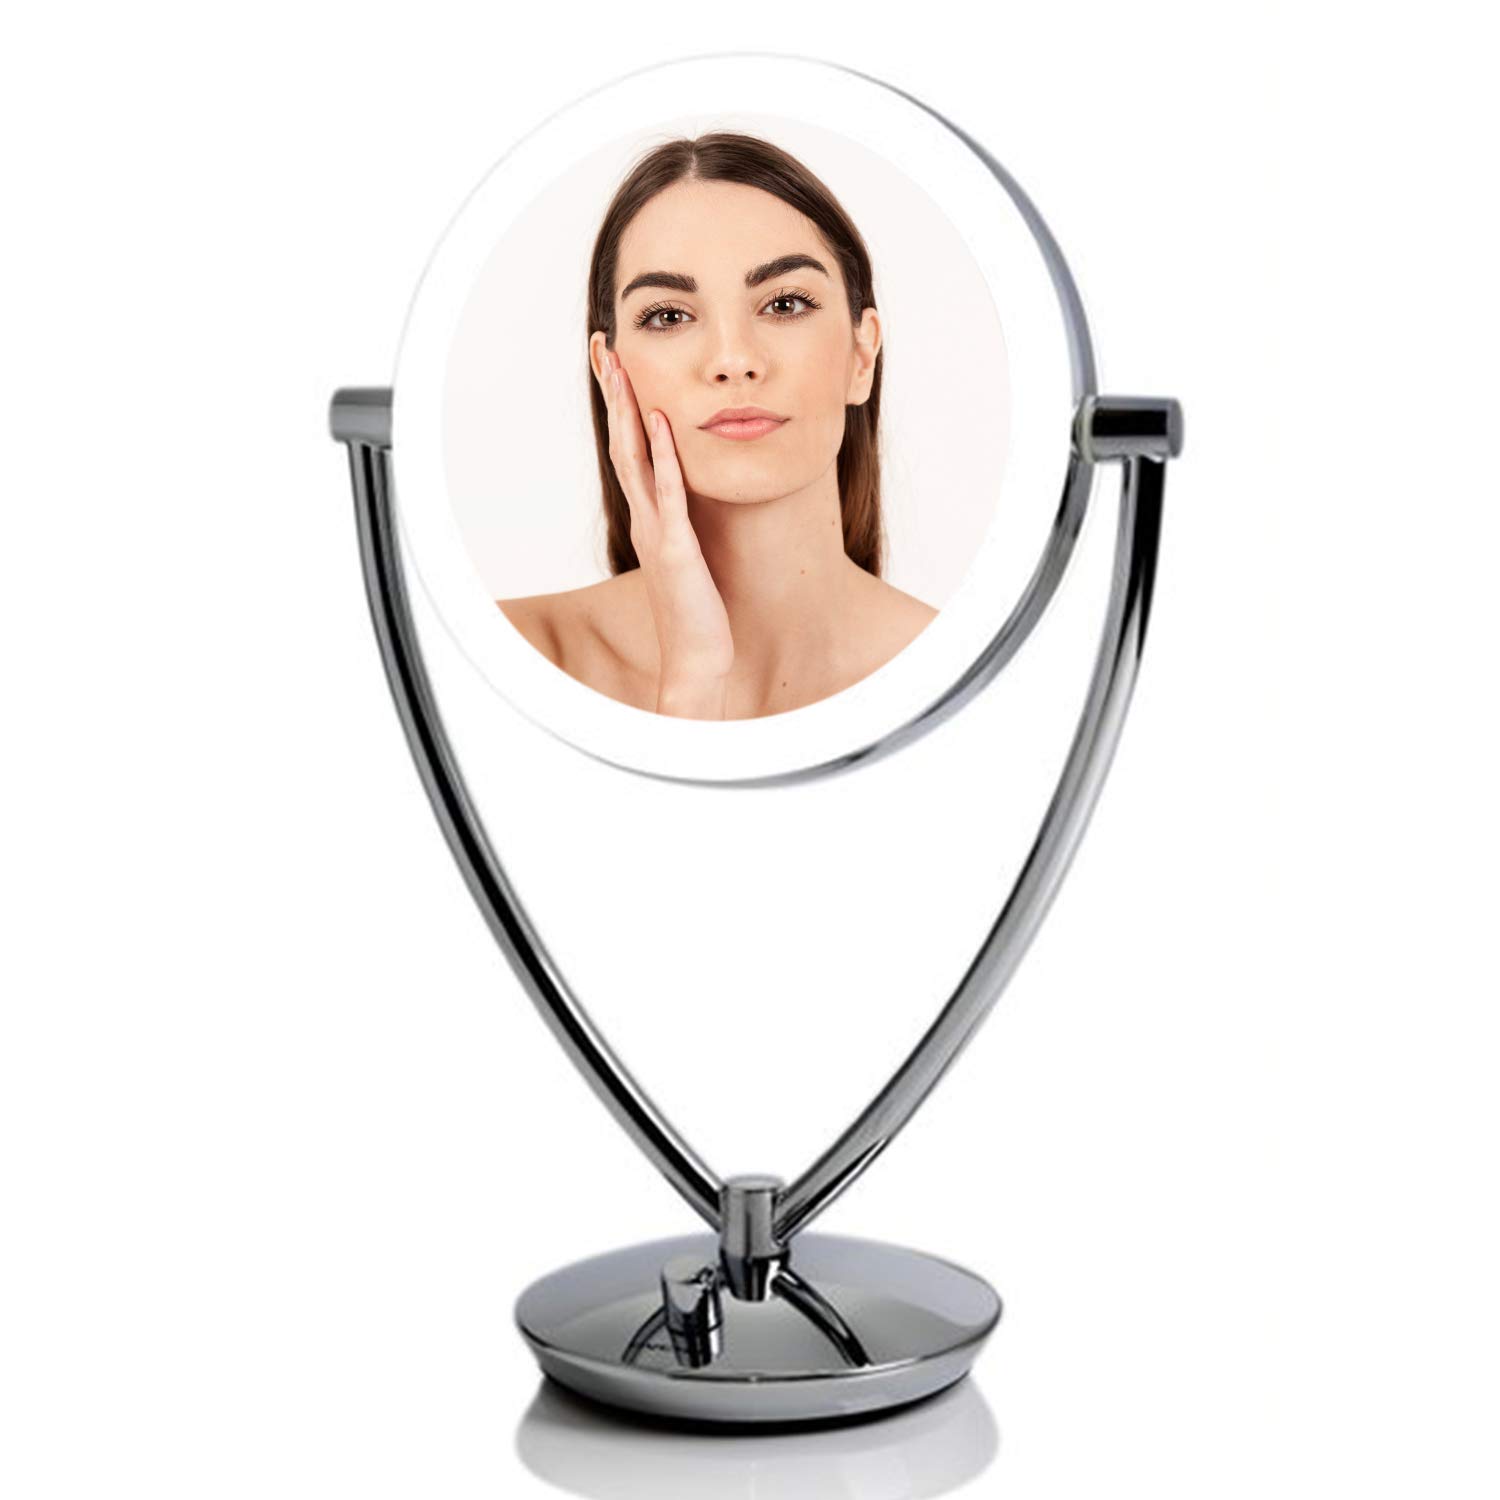 Ovente LED Lighted Makeup Mirror 7.5 Inch Table Top 1X 10X Magnifier Dimmable illuminated Adjustable Circle Chrome MLT75CH1X10X